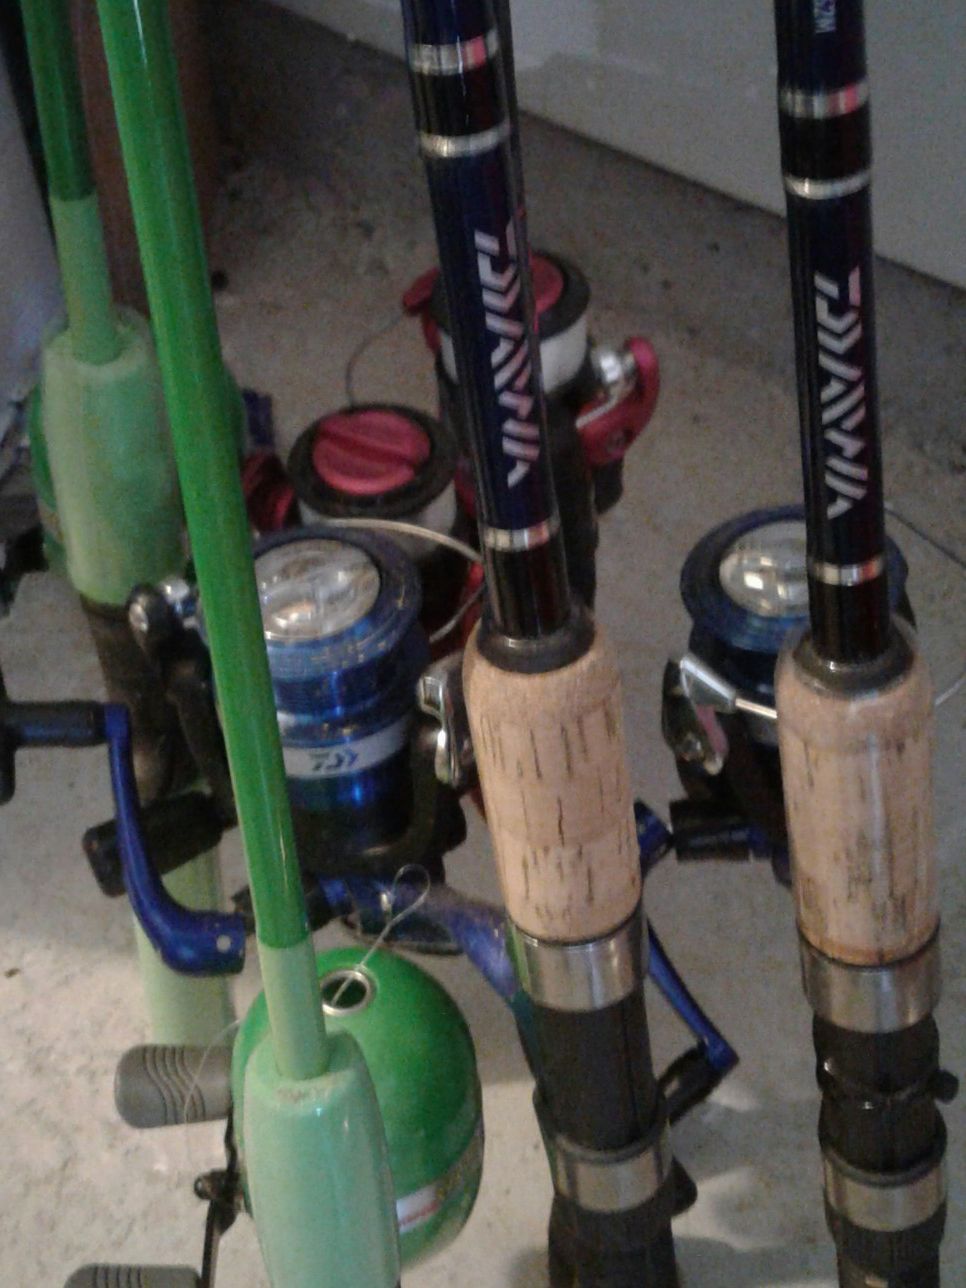 Assorted fishing Rods for sale / Asking price is $55.00 for all 6 Rods